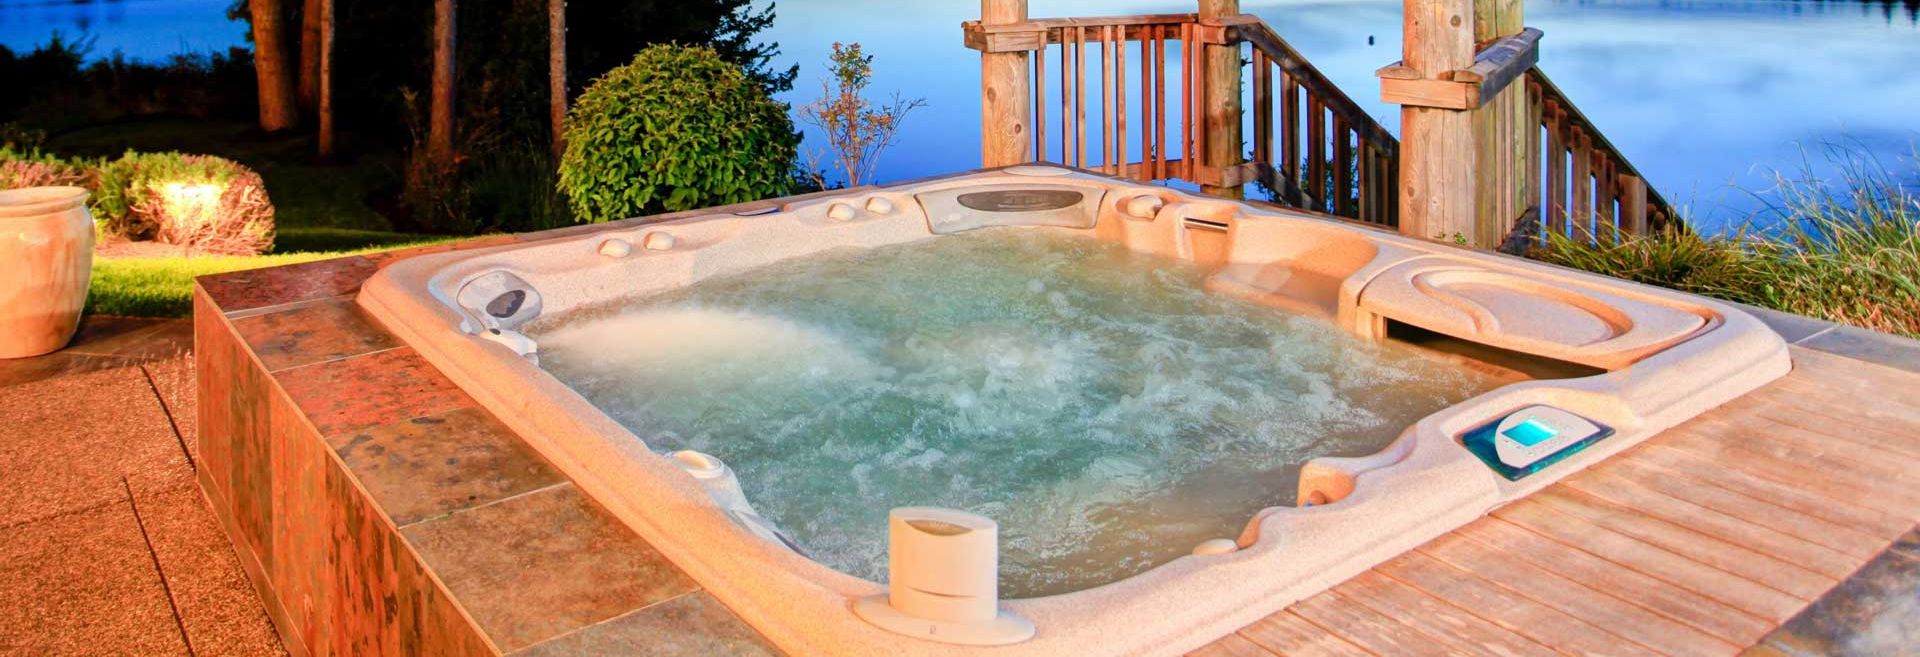 Installing Your Hot Tub